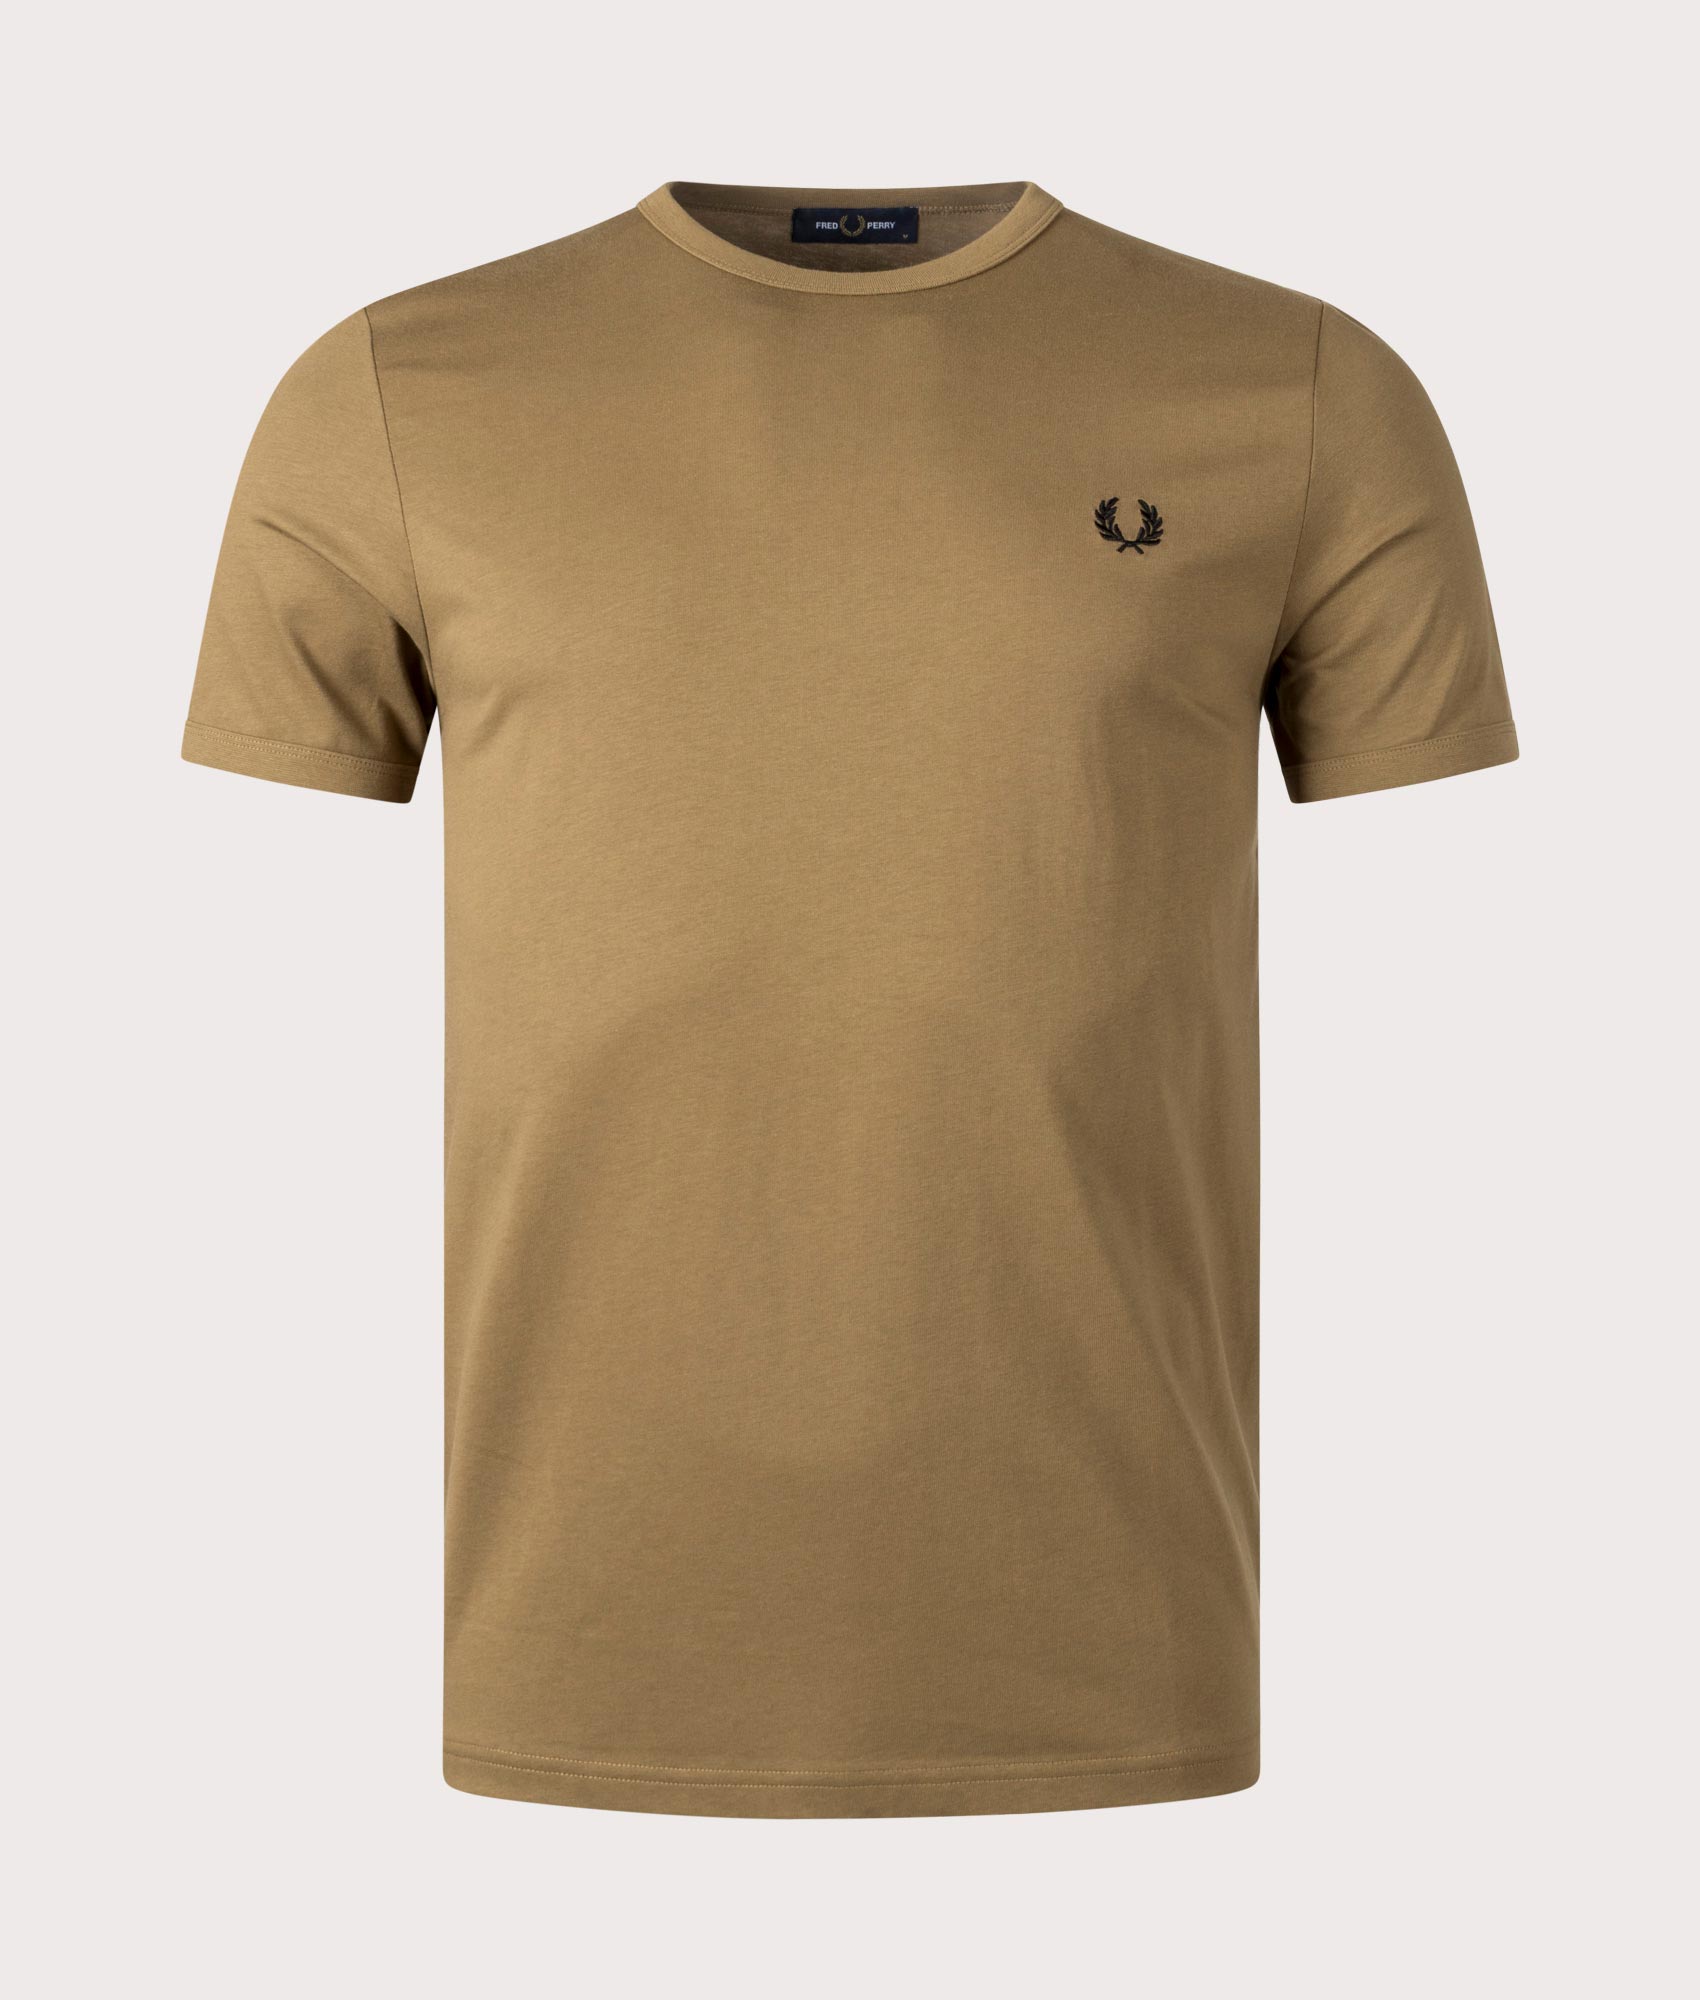 Fred Perry Mens Ringer T-Shirt - Colour: R60 Shaded Stone - Size: Medium